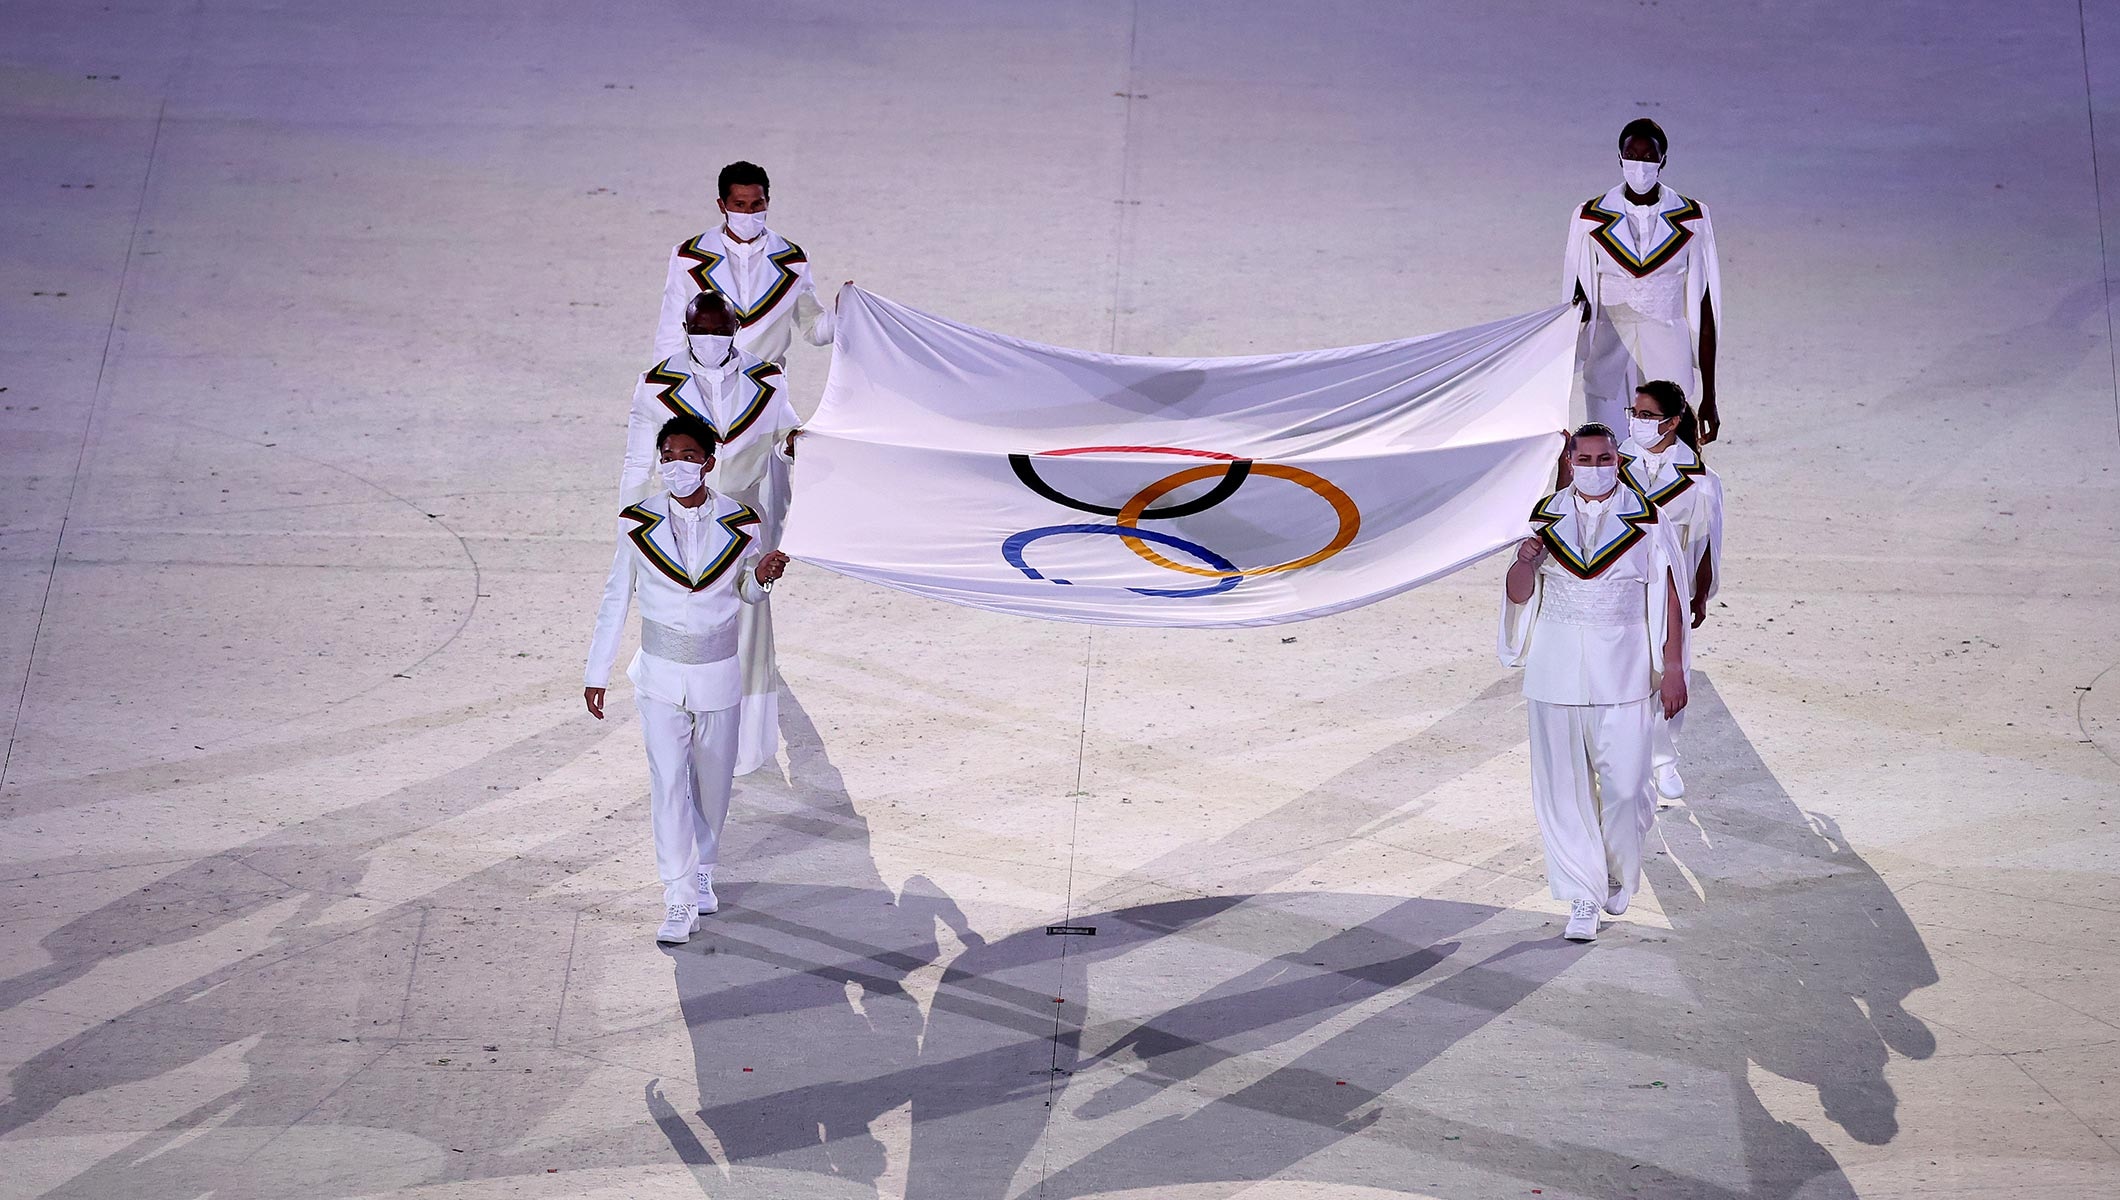 The flag bearers of the Olympic flag